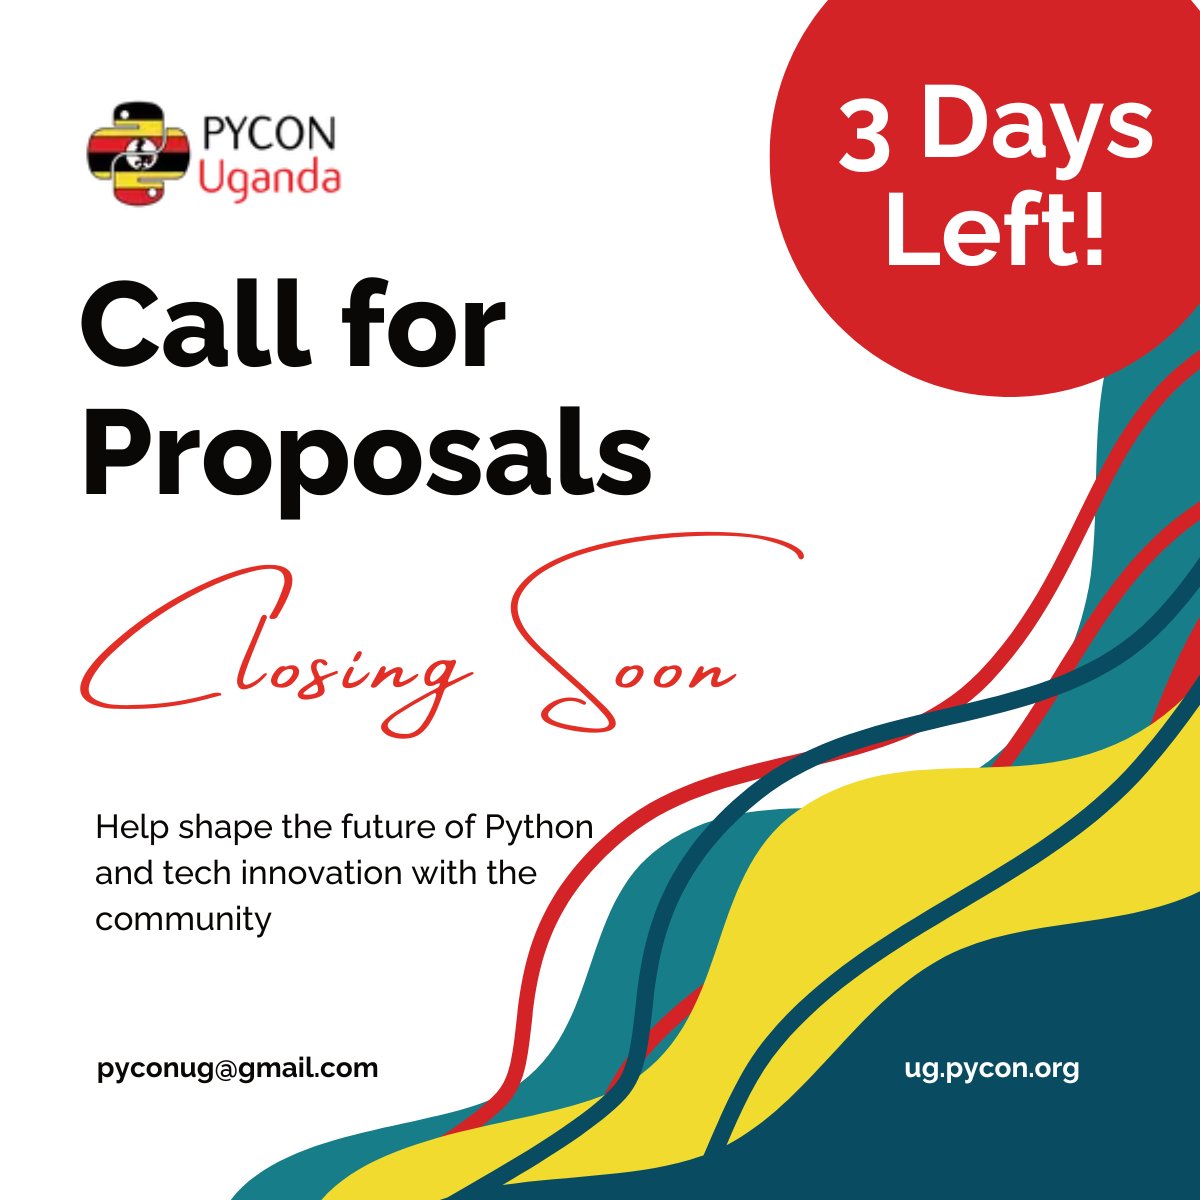 📢 Only 3 days to go! This is your chance to contribute to the Python community and share your knowledge at PyCon Uganda. Submit your proposal today:  papercall.io/pyconug

#PyConUganda #TechTalk #Community